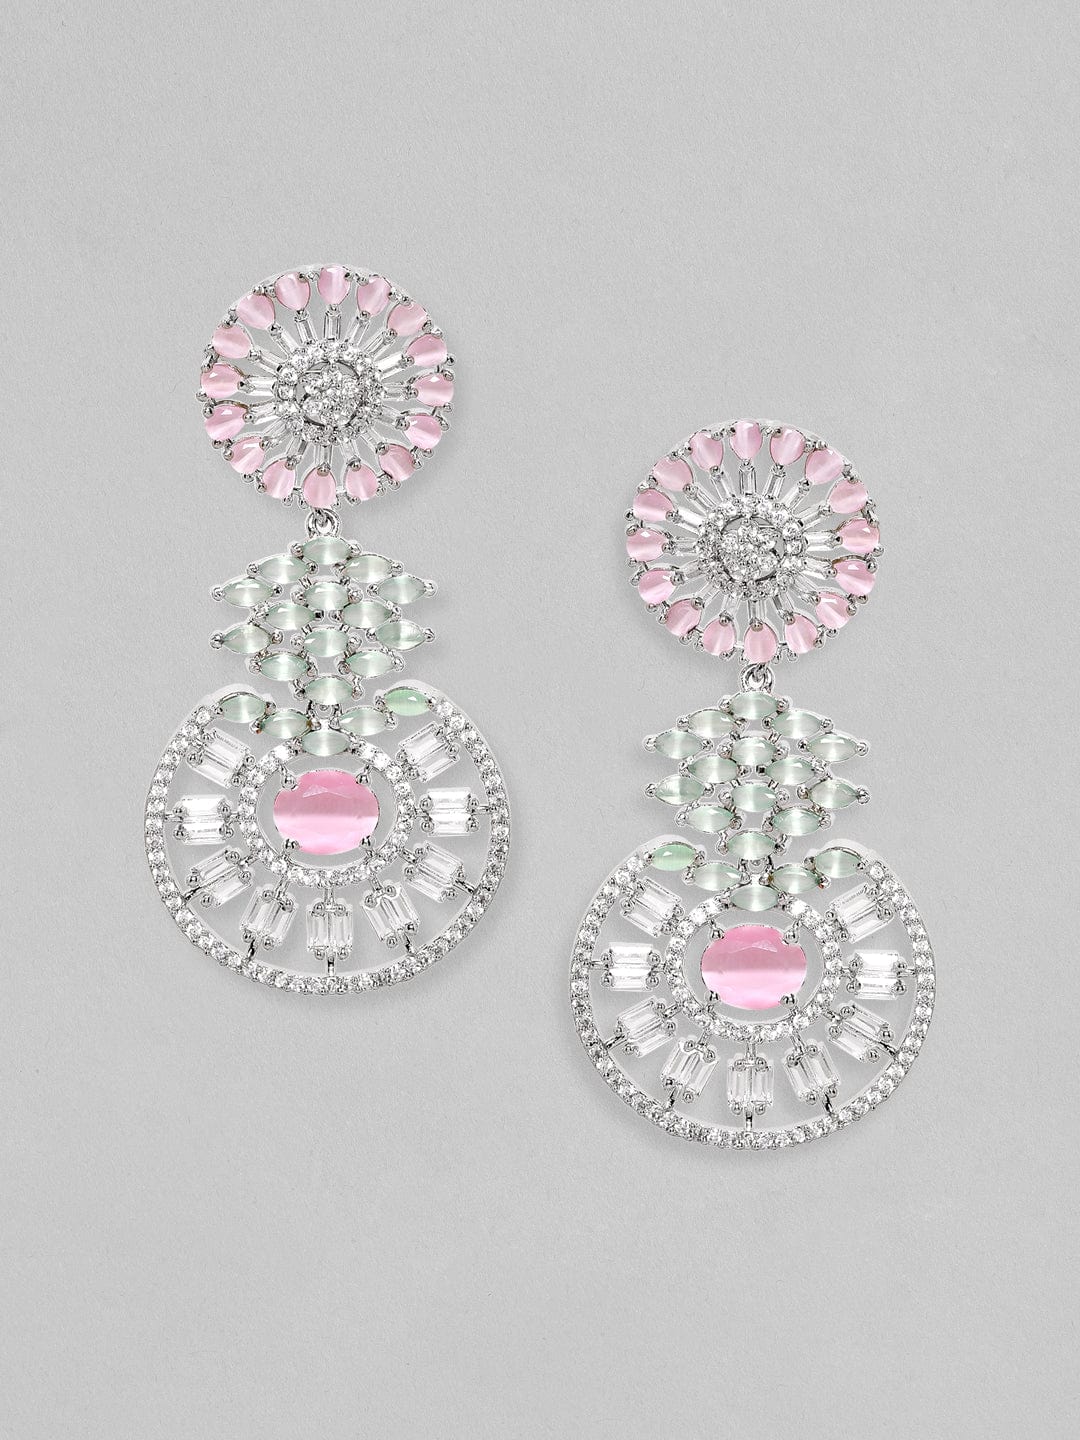 Rubans AD Pink Stone Round Cocktail Earrings Earrings